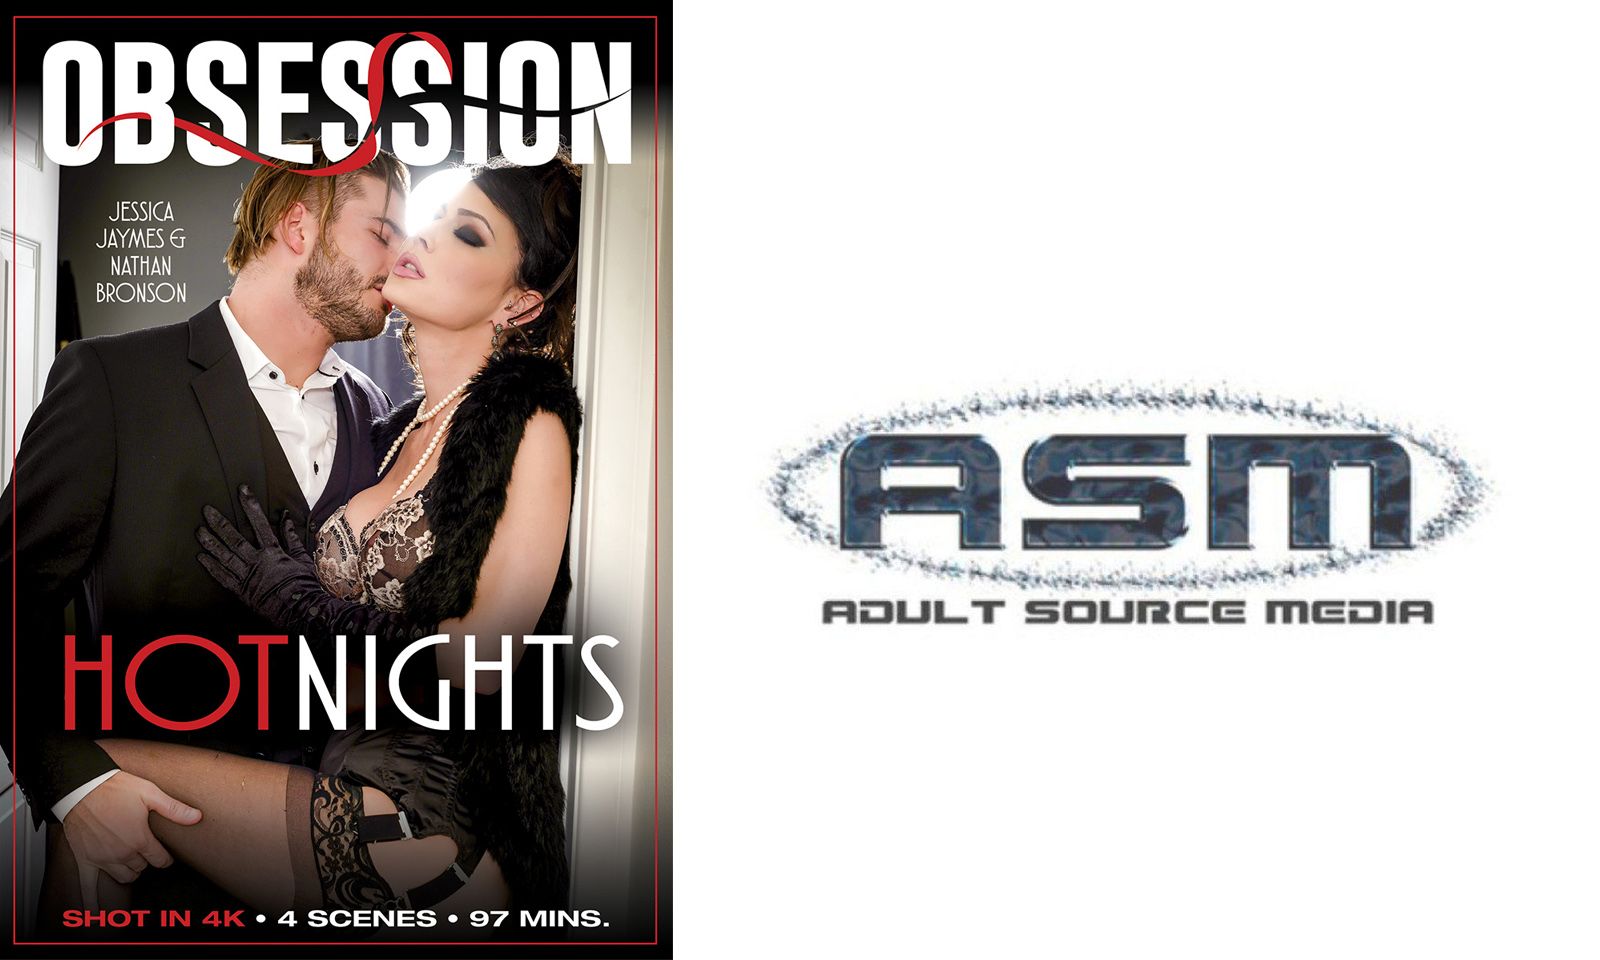 Adult Source Media Adds New Studio Obsession to Distro Lineup